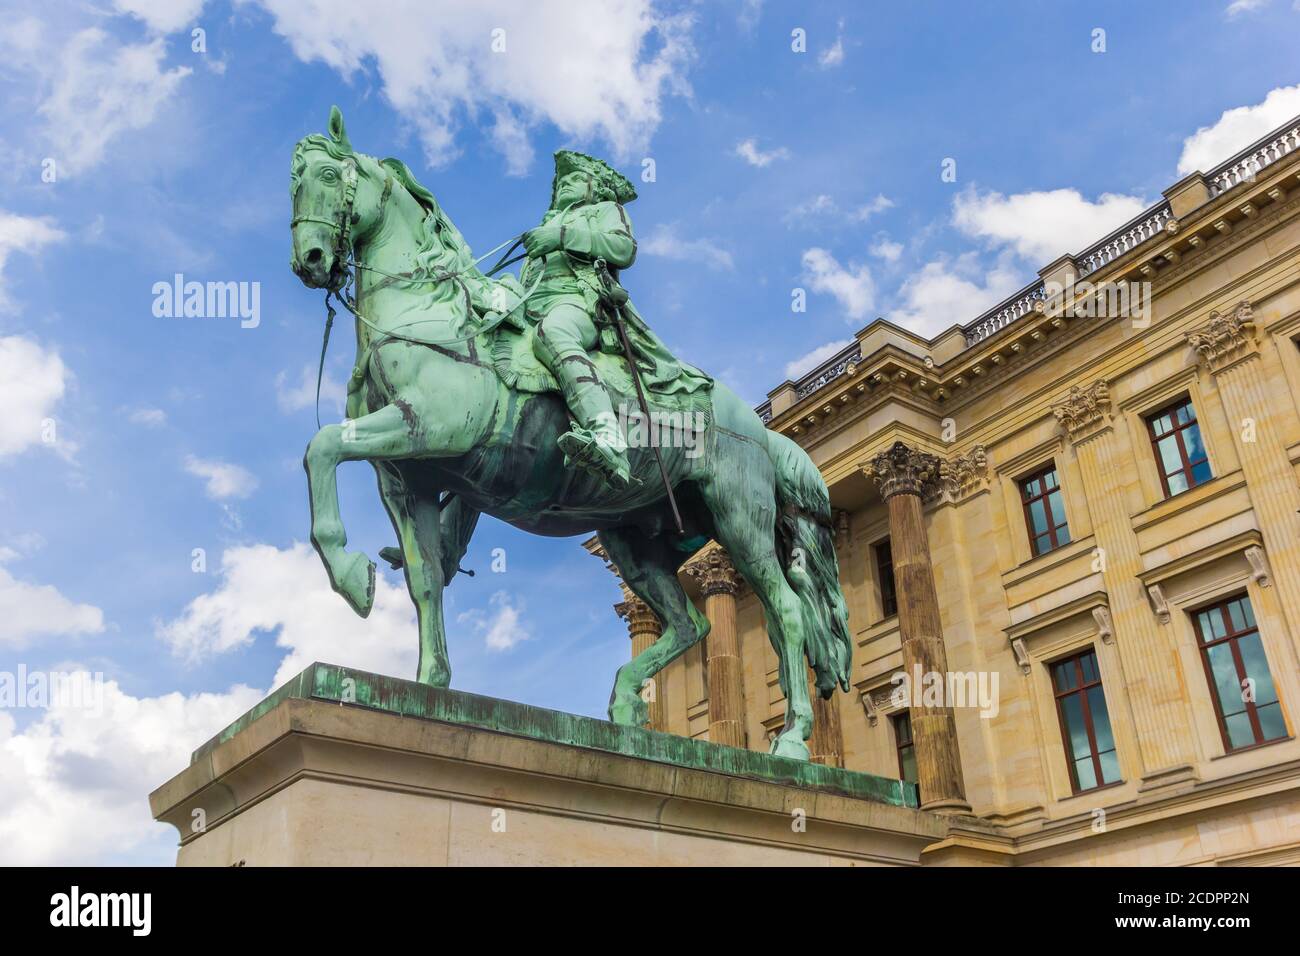 Statue of a horseman in front of the castle in Braunschweig, Germany Stock Photo